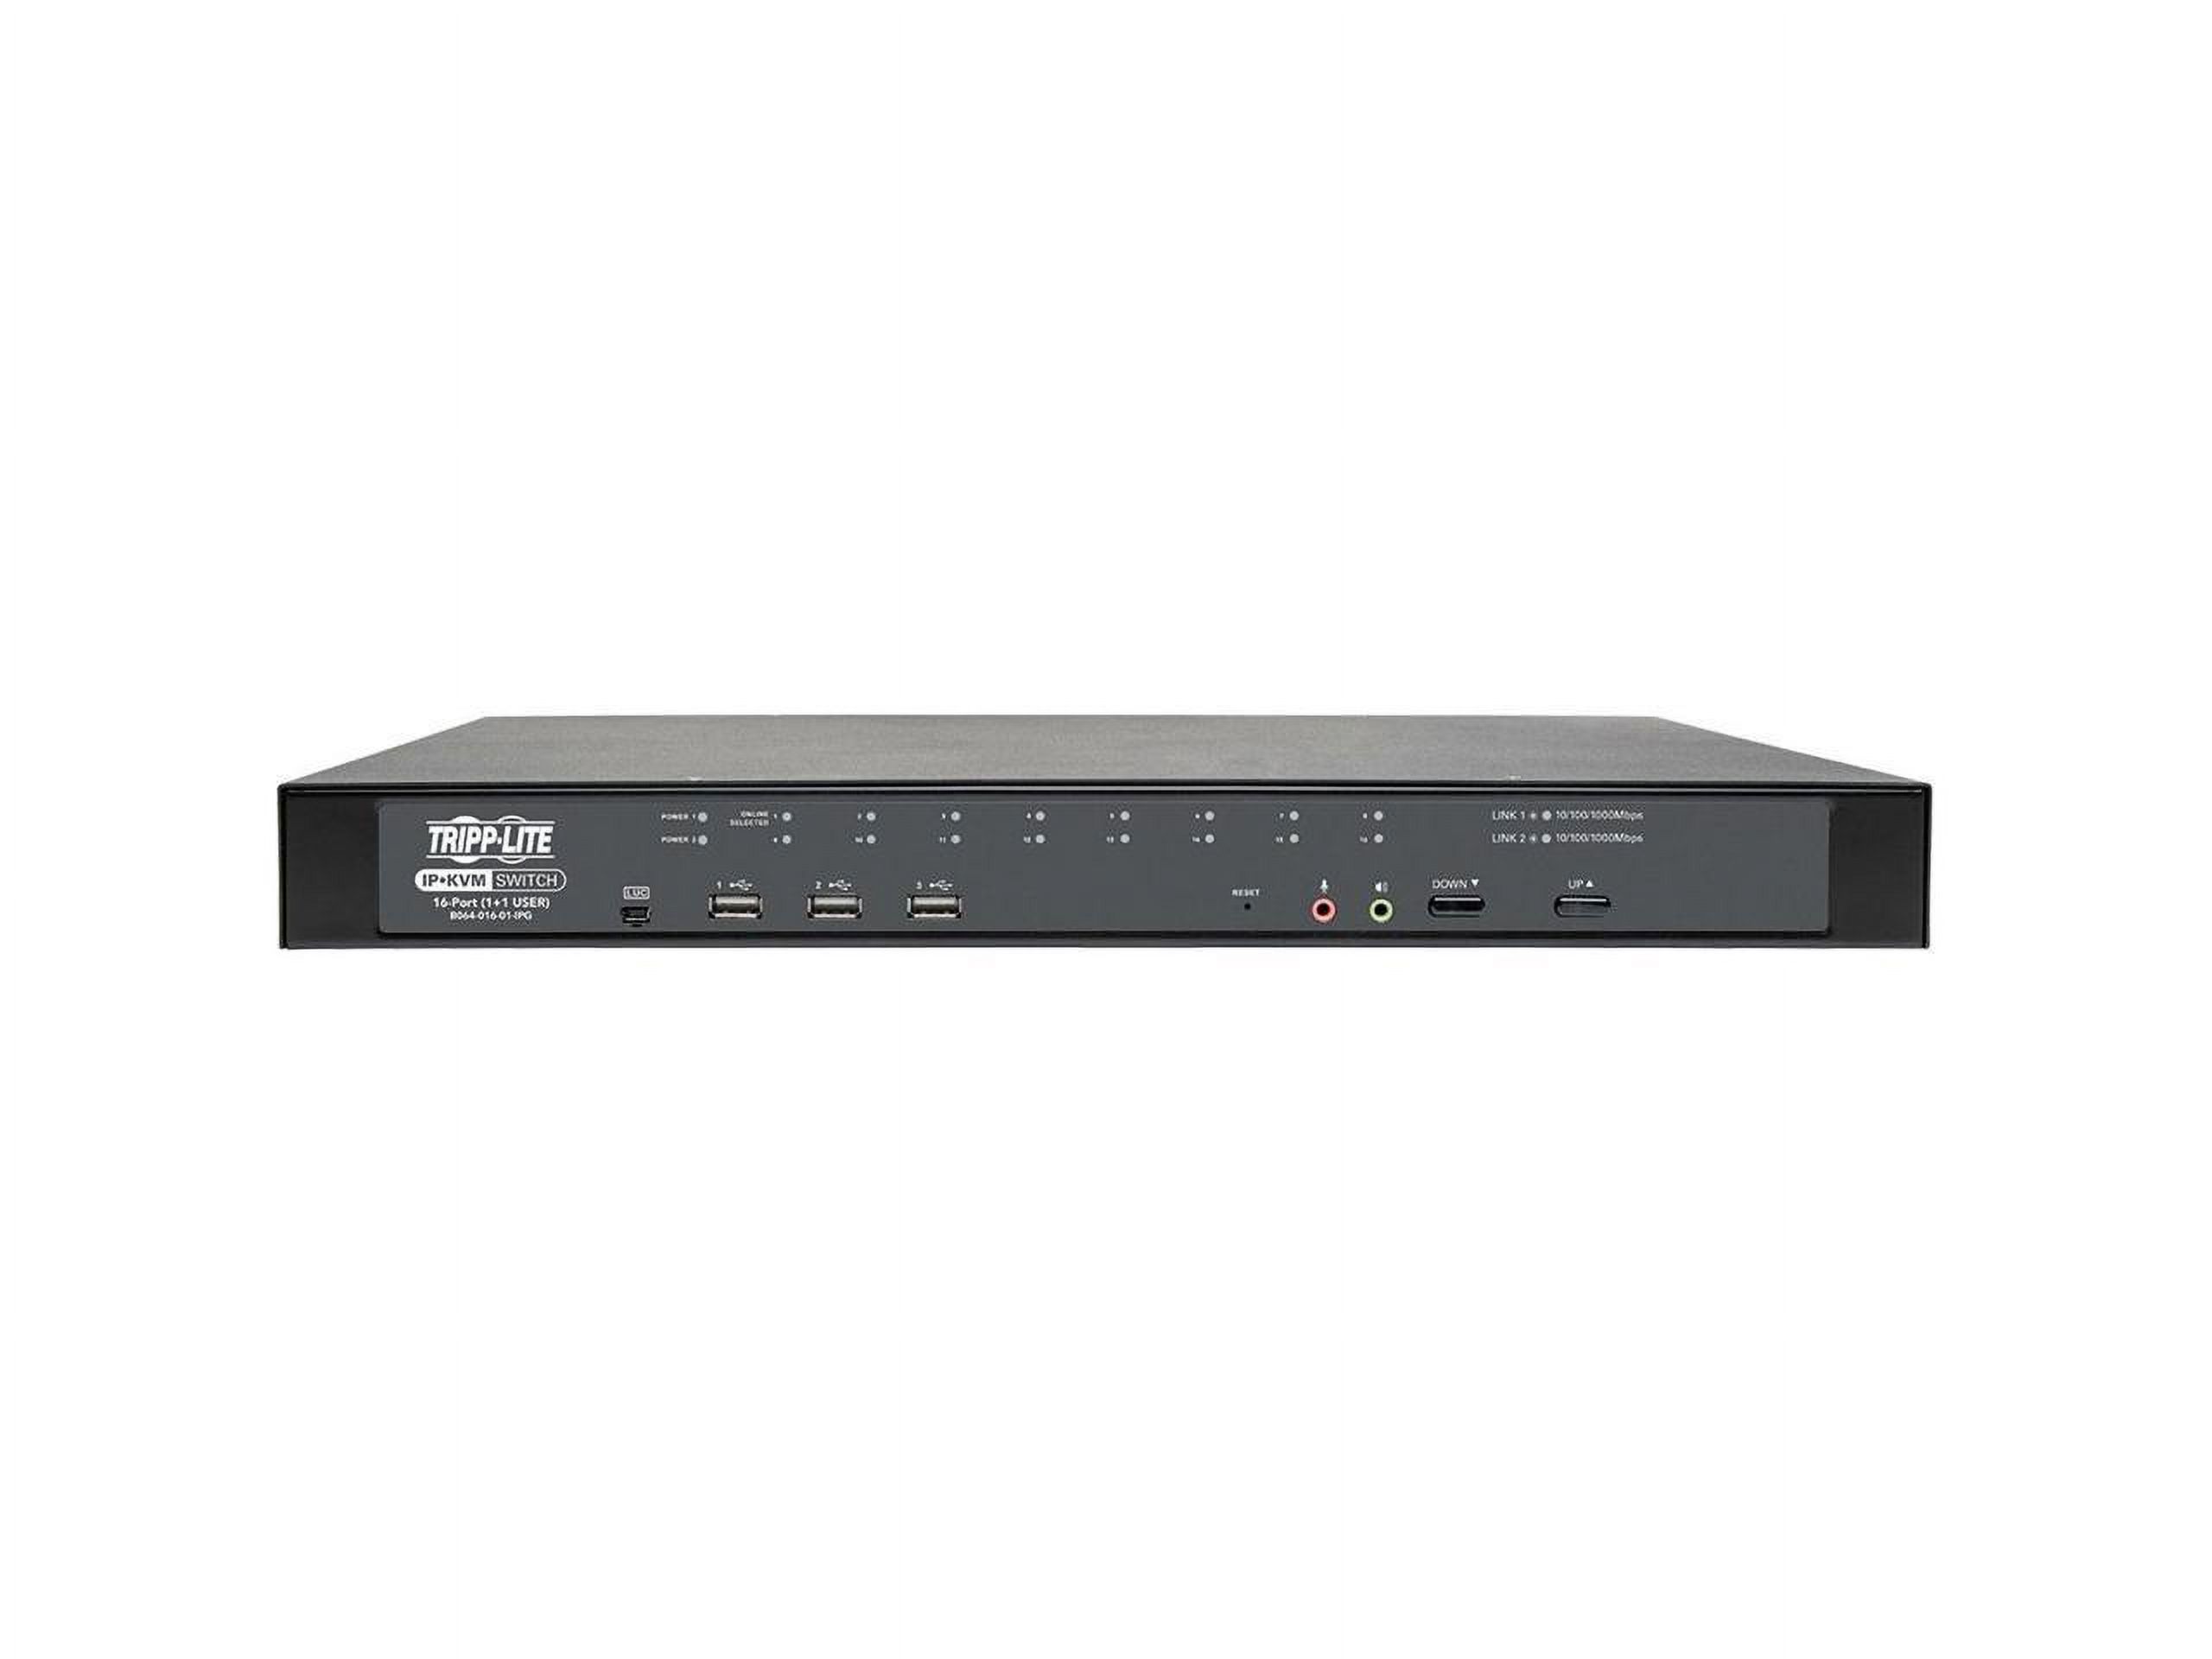 Tripp Lite 16-Port Cat5 KVM over IP Switch with Virtual Media - 1 Local & 1 Remote User, 1U Rack-Mount, TAA - KVM switch - 16 x KVM port(s) - 1 local user - 2 IP users - rack-mountable - government GSA - TAA Compliant - image 2 of 5